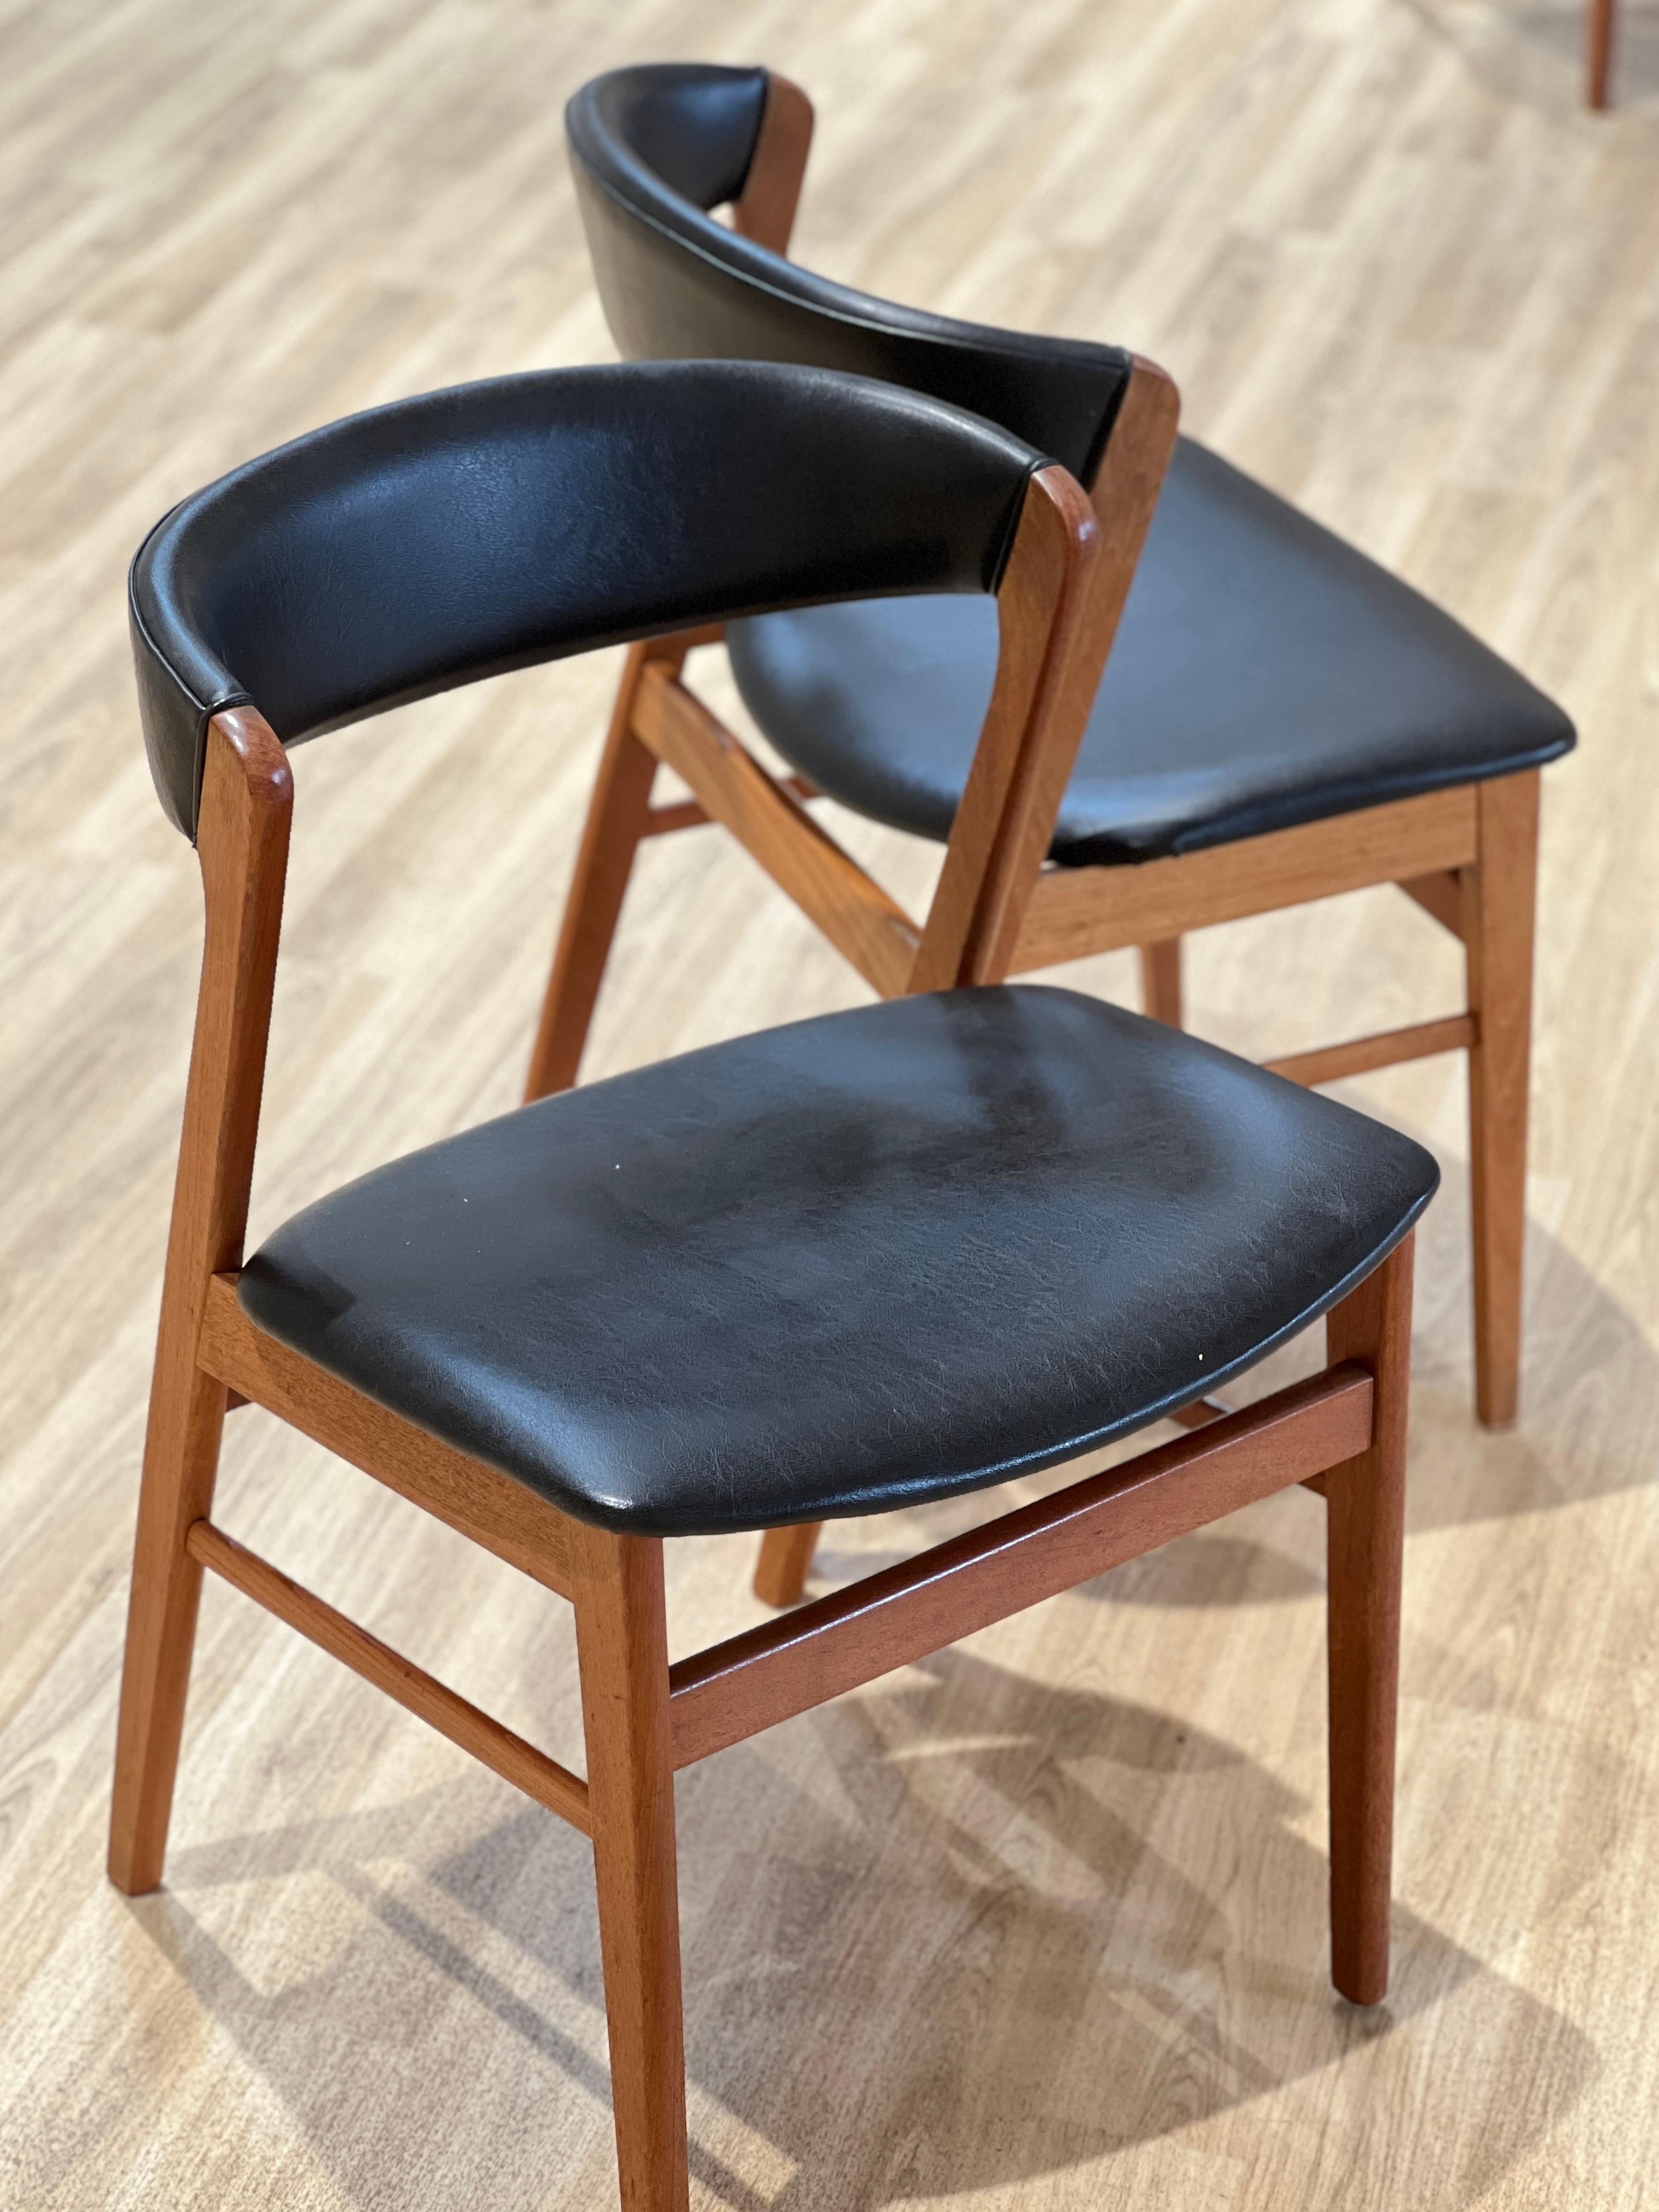 This is a beautiful set of six Danish chairs that are skillfully crafted using high-quality teak wood, renowned for its durability and resistance to decay. These chairs are not only sturdy but also adorned with black leatherette upholstery, which